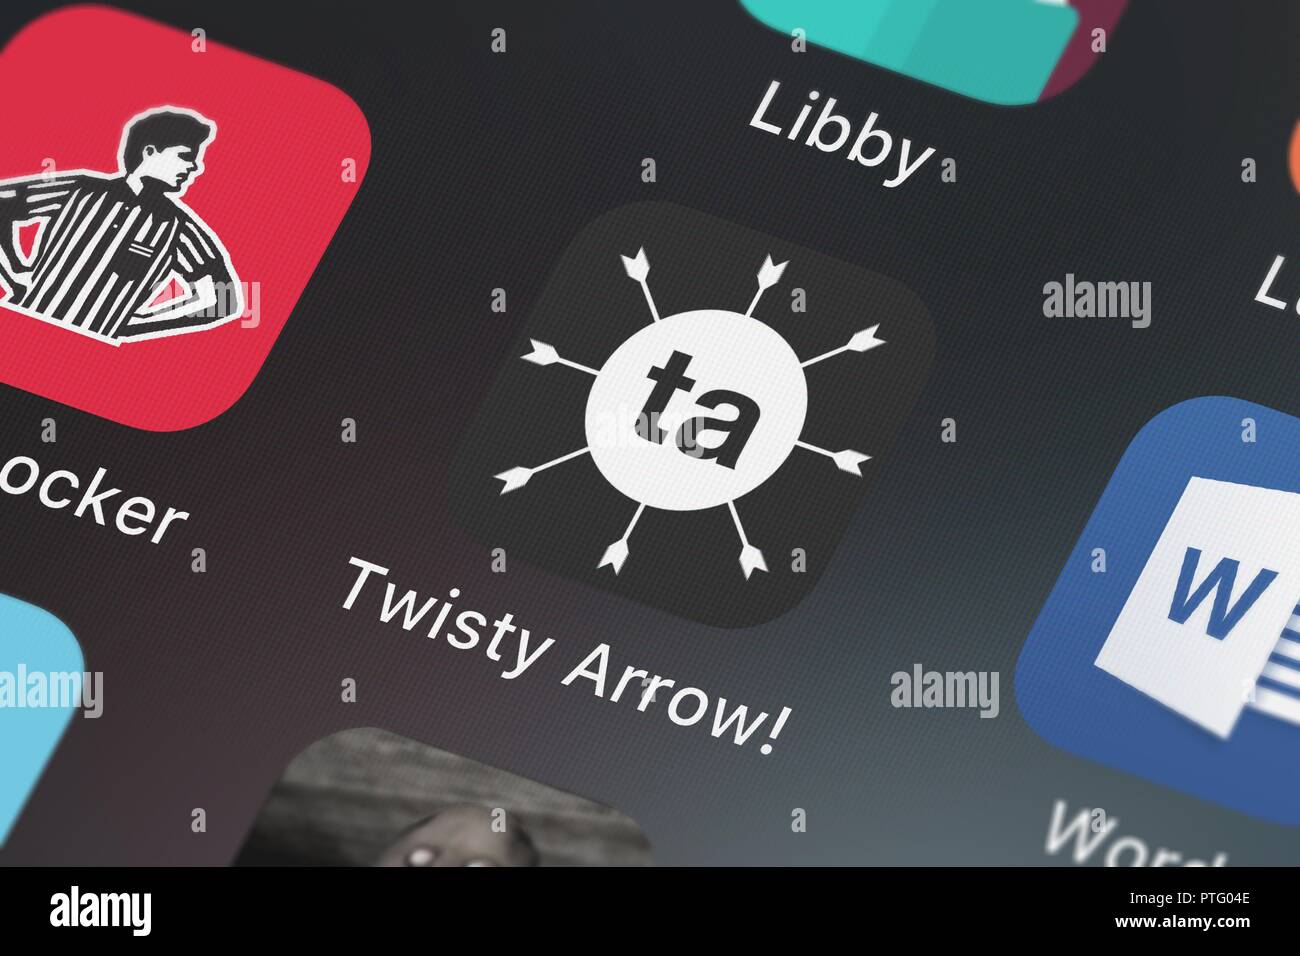 aa - Twisty Arrow for Android - Download